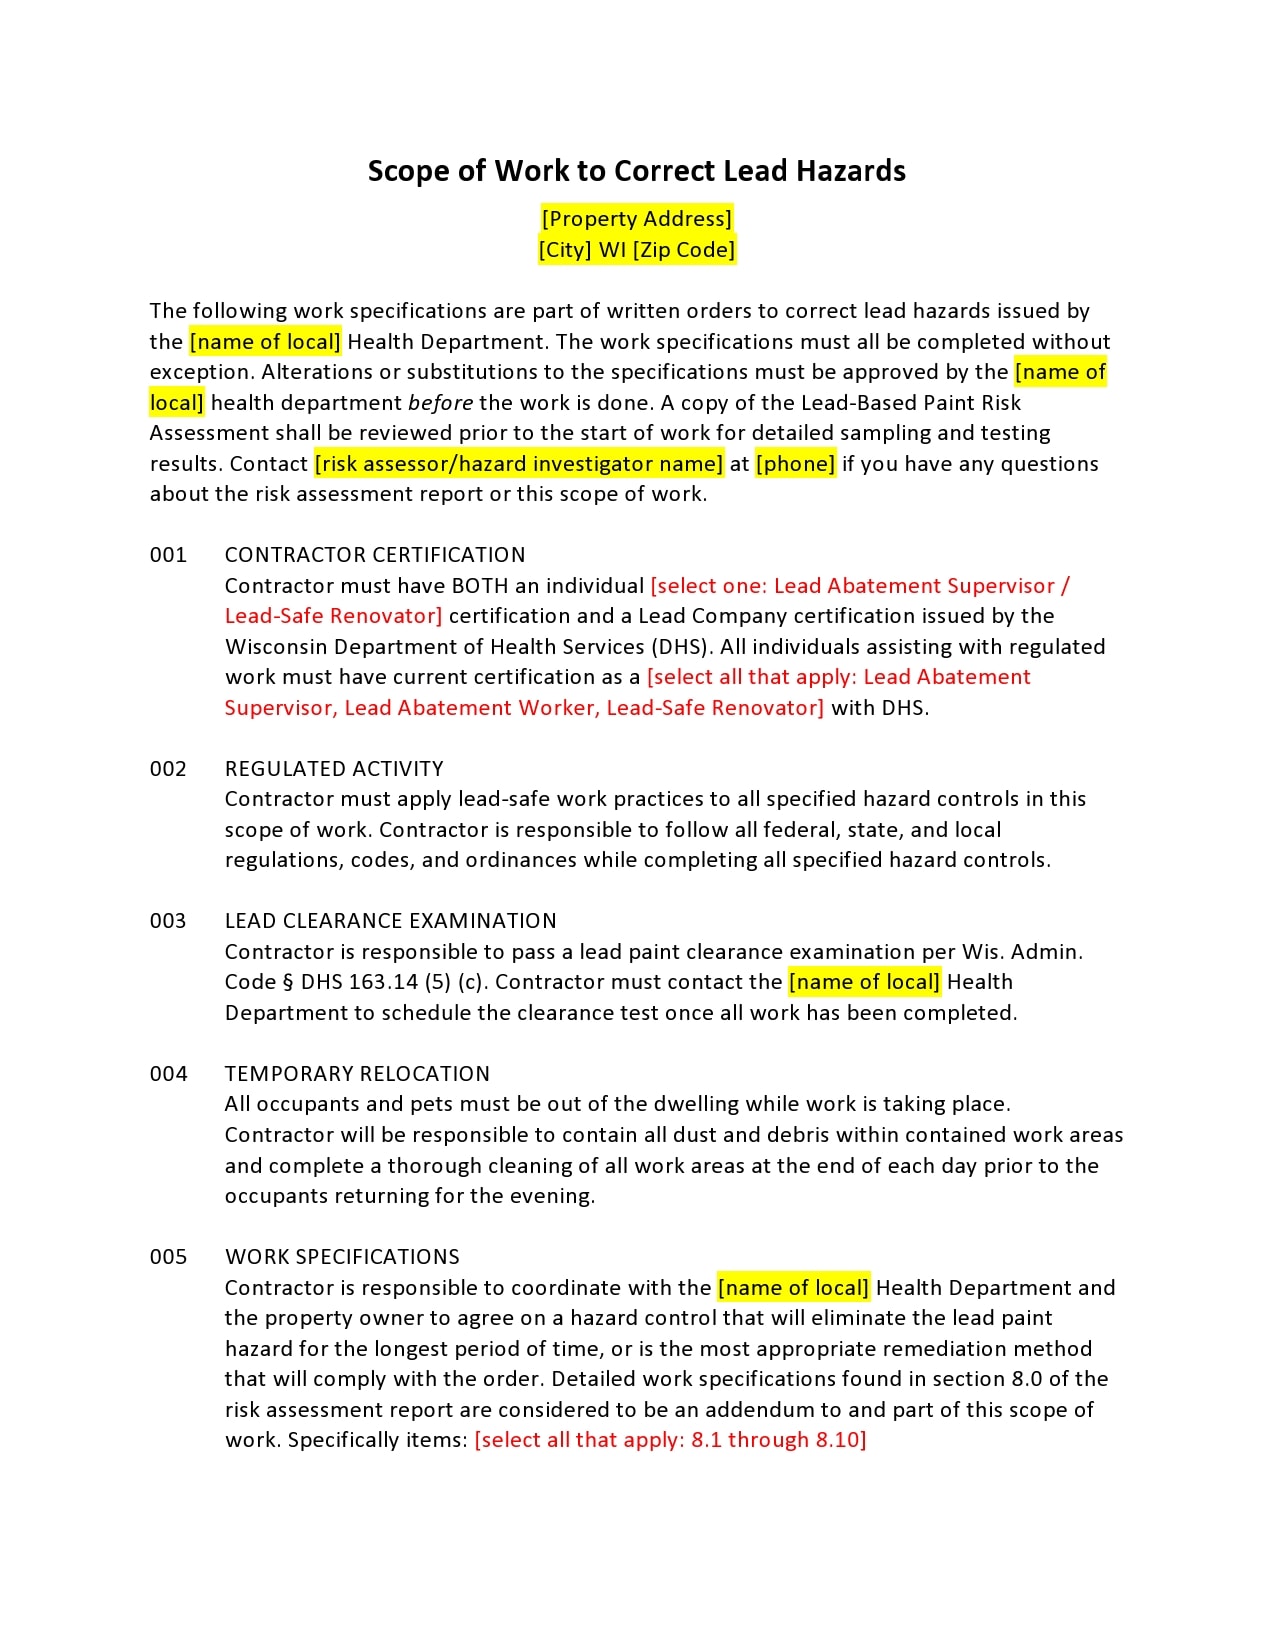 22 Simple Scope Of Work Templates (& Examples) Inside scope of work agreement template